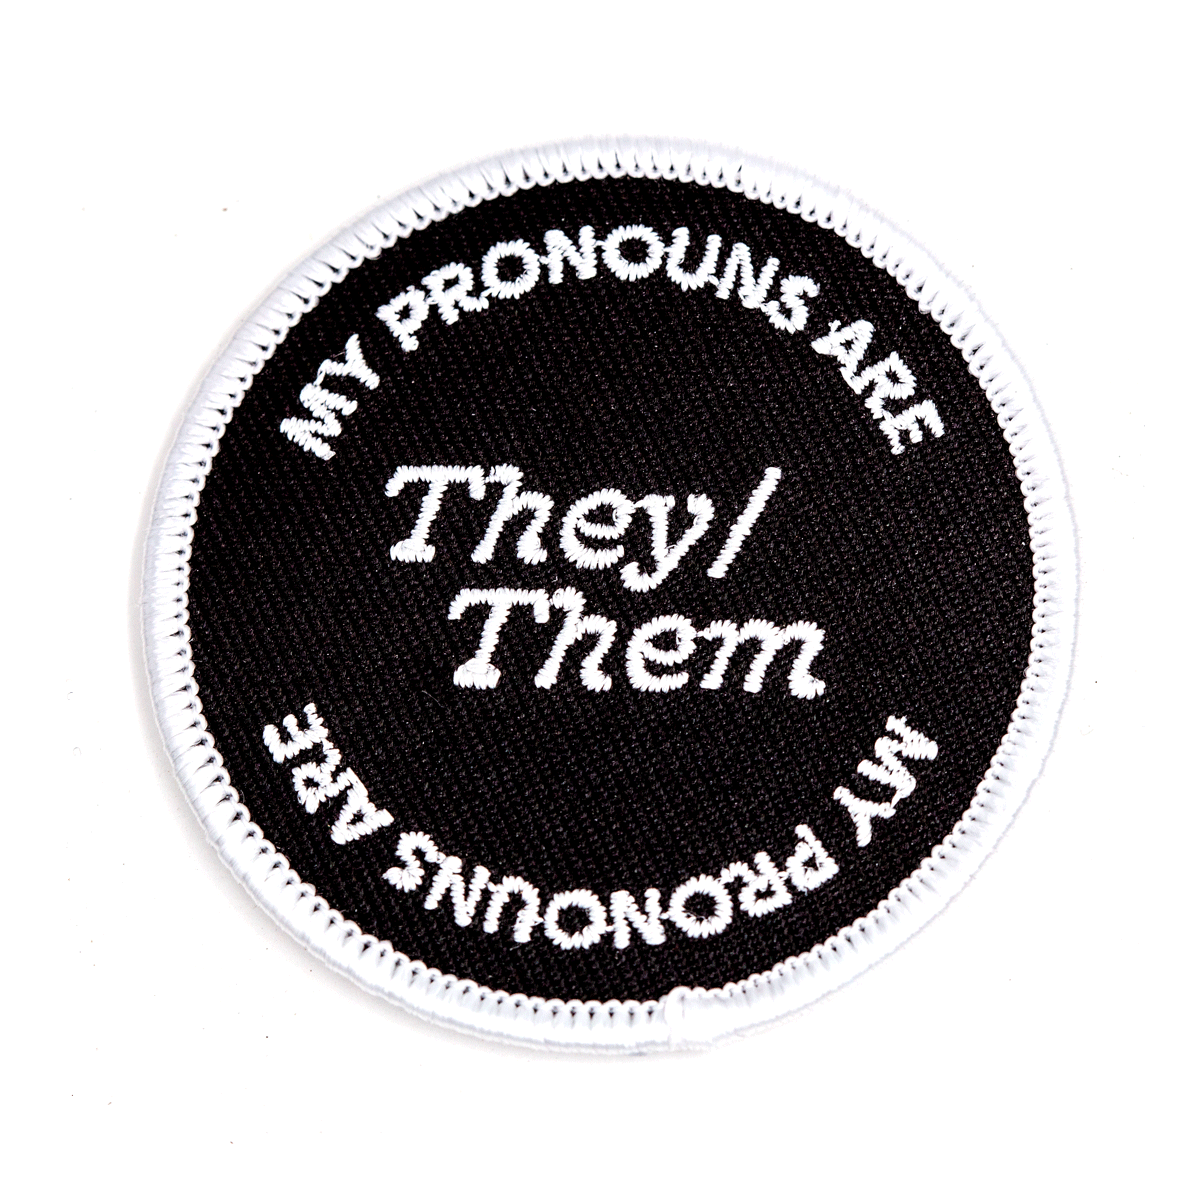 They Them Pronouns Embroidered Iron-On Patch